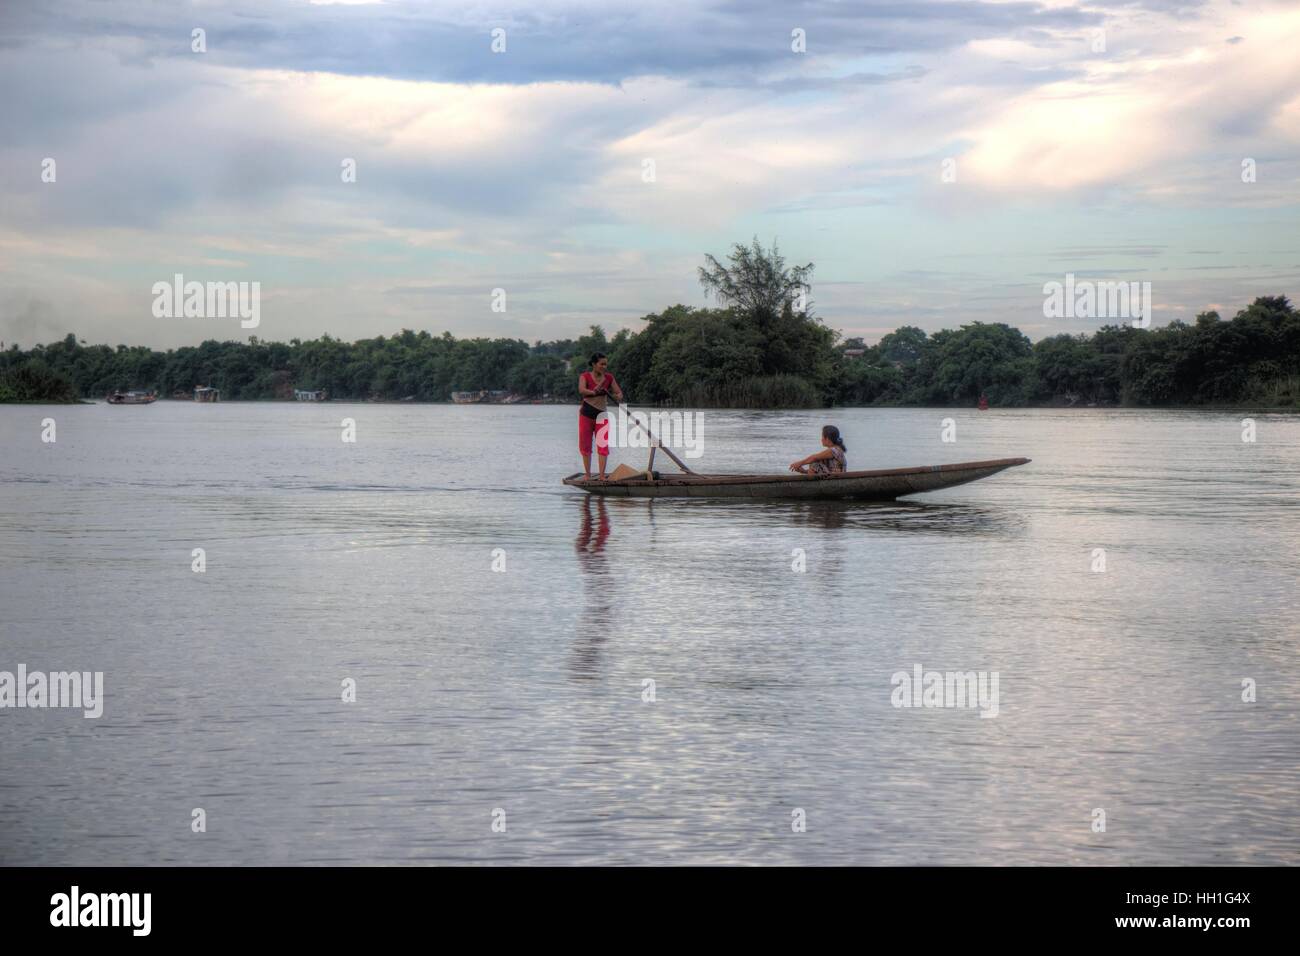 A woman rowing a boat with a passenger, down the Perfume River, Hue, Vietnam. Stock Photo